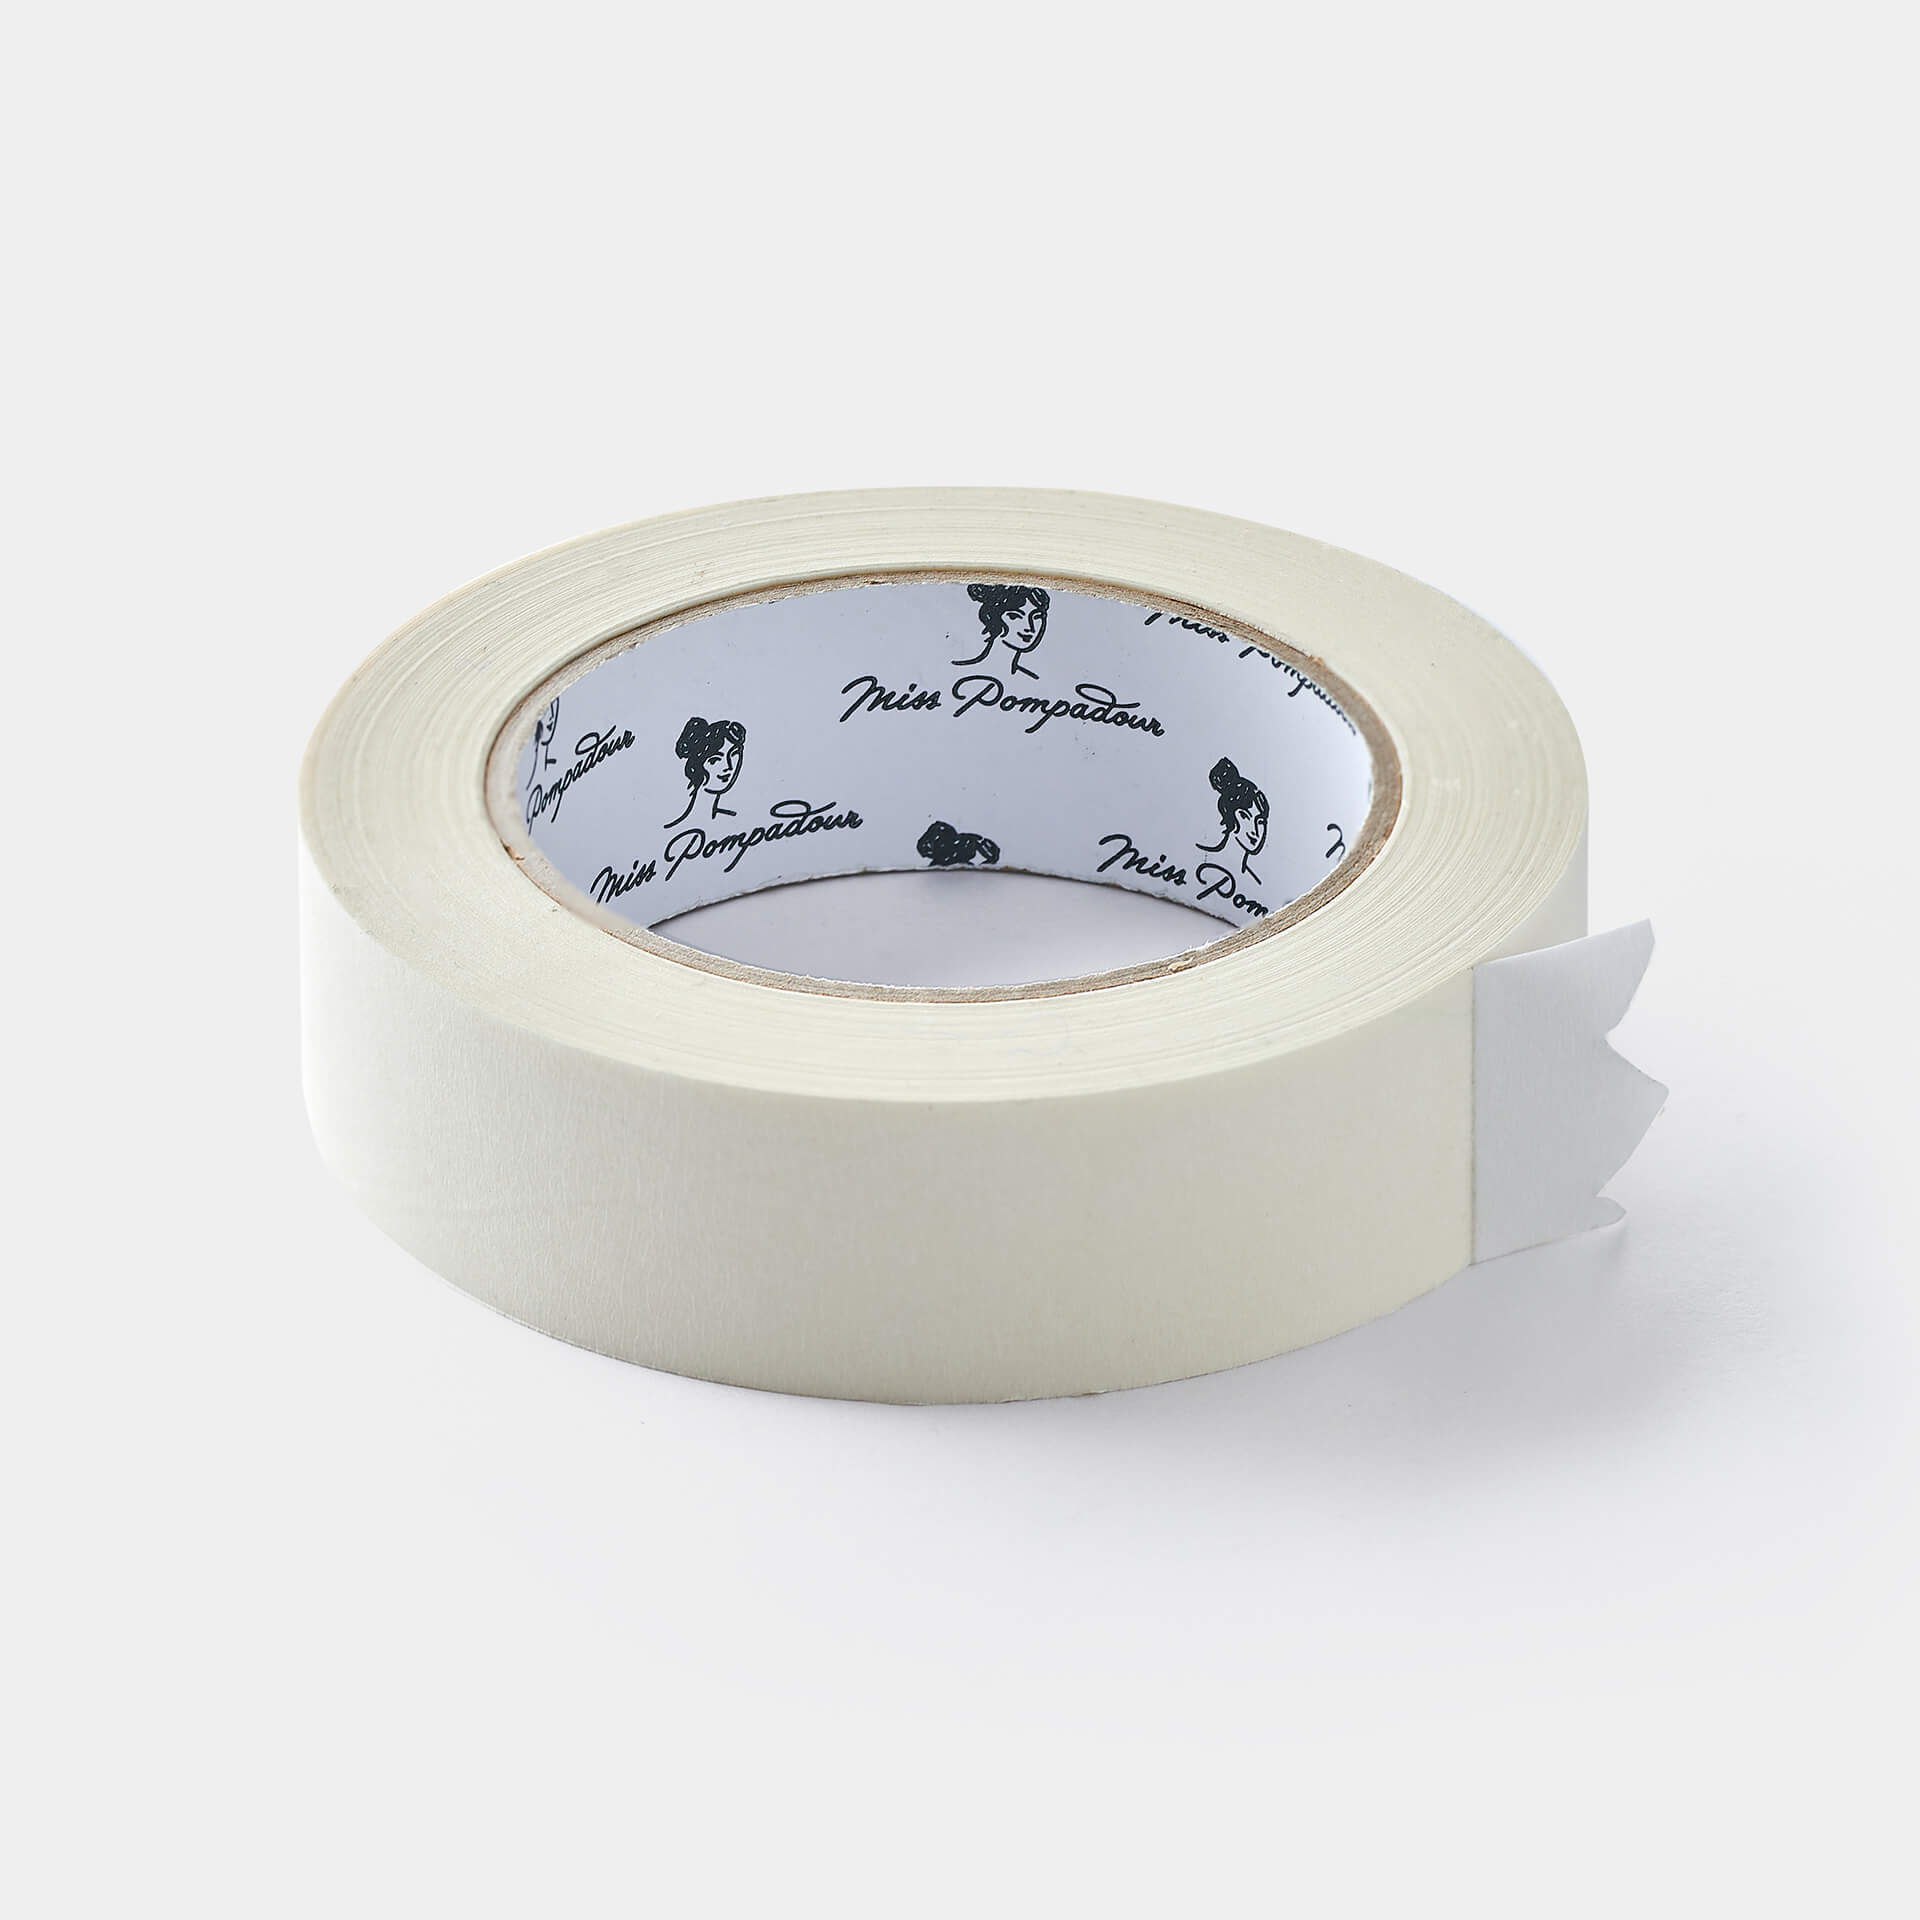 To Mask - MissPompadour Adhesive Tape 30mm